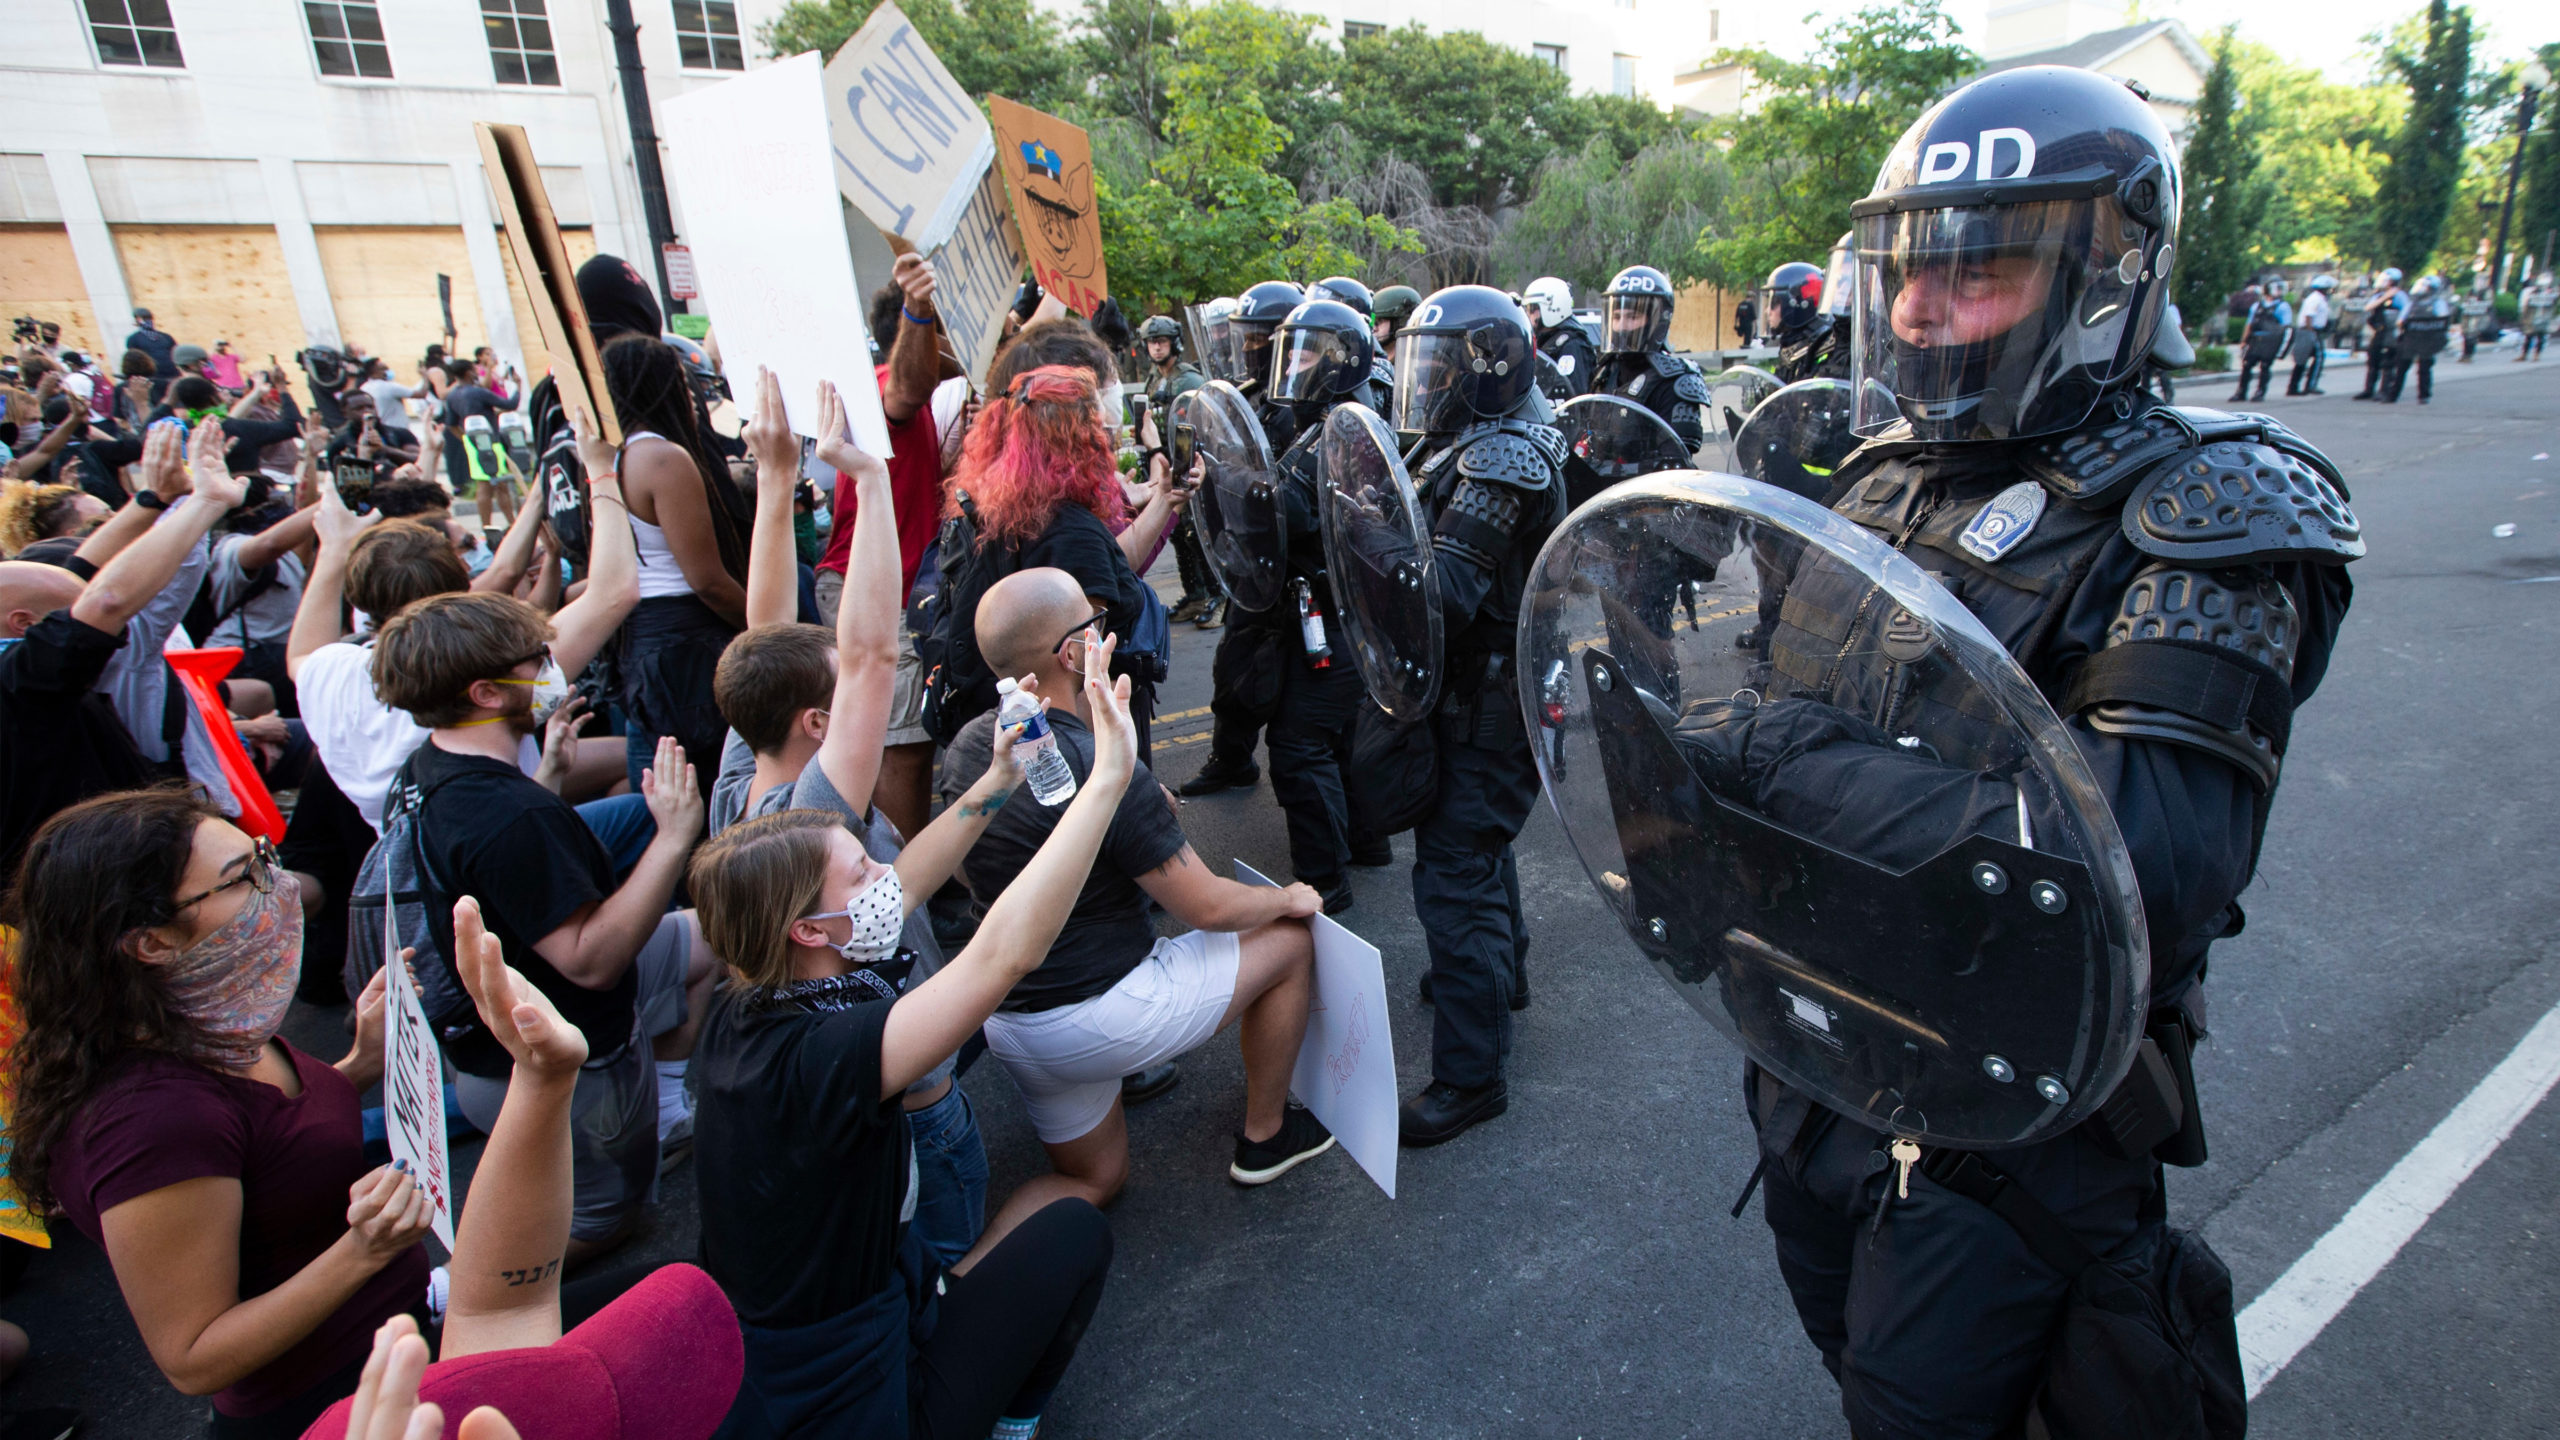 Officers form a riot wall near the White House on June 1, 2020. (Photo: Jose Luis Magana, Getty Images)